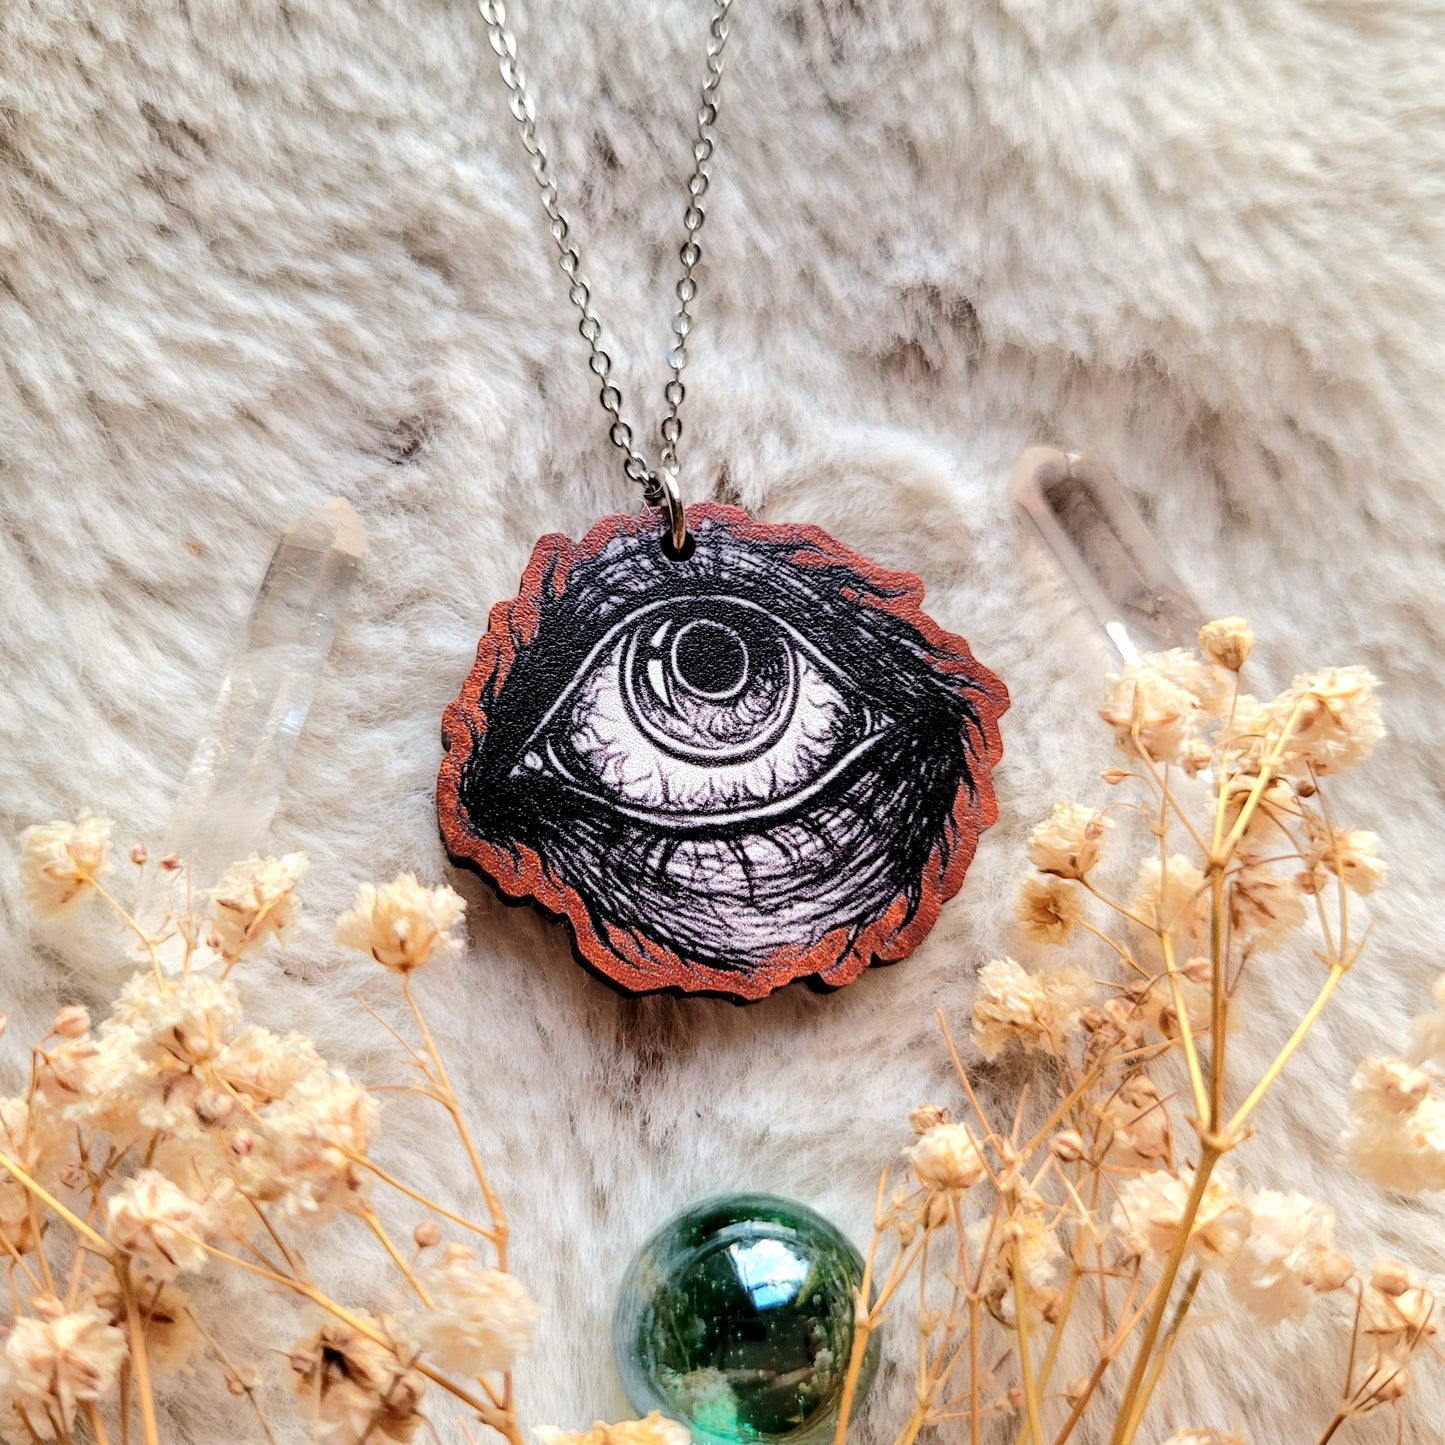 Creepy Eyeball illustrated necklace, responsibly sourced cherry wood, chain options available, by Grace Moth